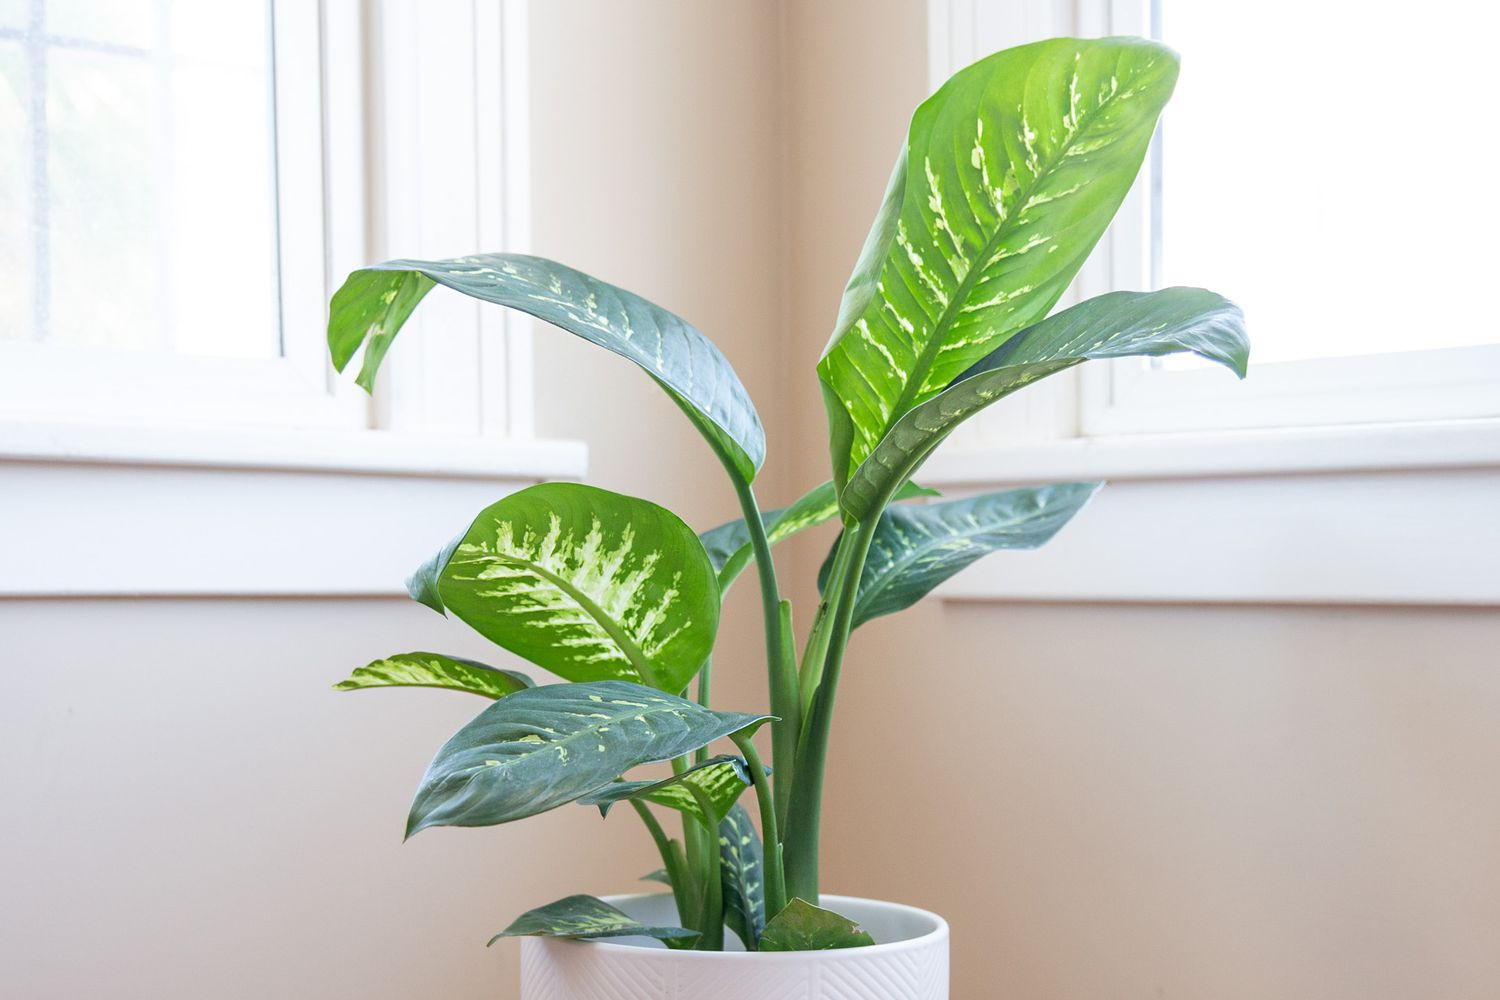 How To Grow And Care For Dieffenbachia (Dumb Cane)